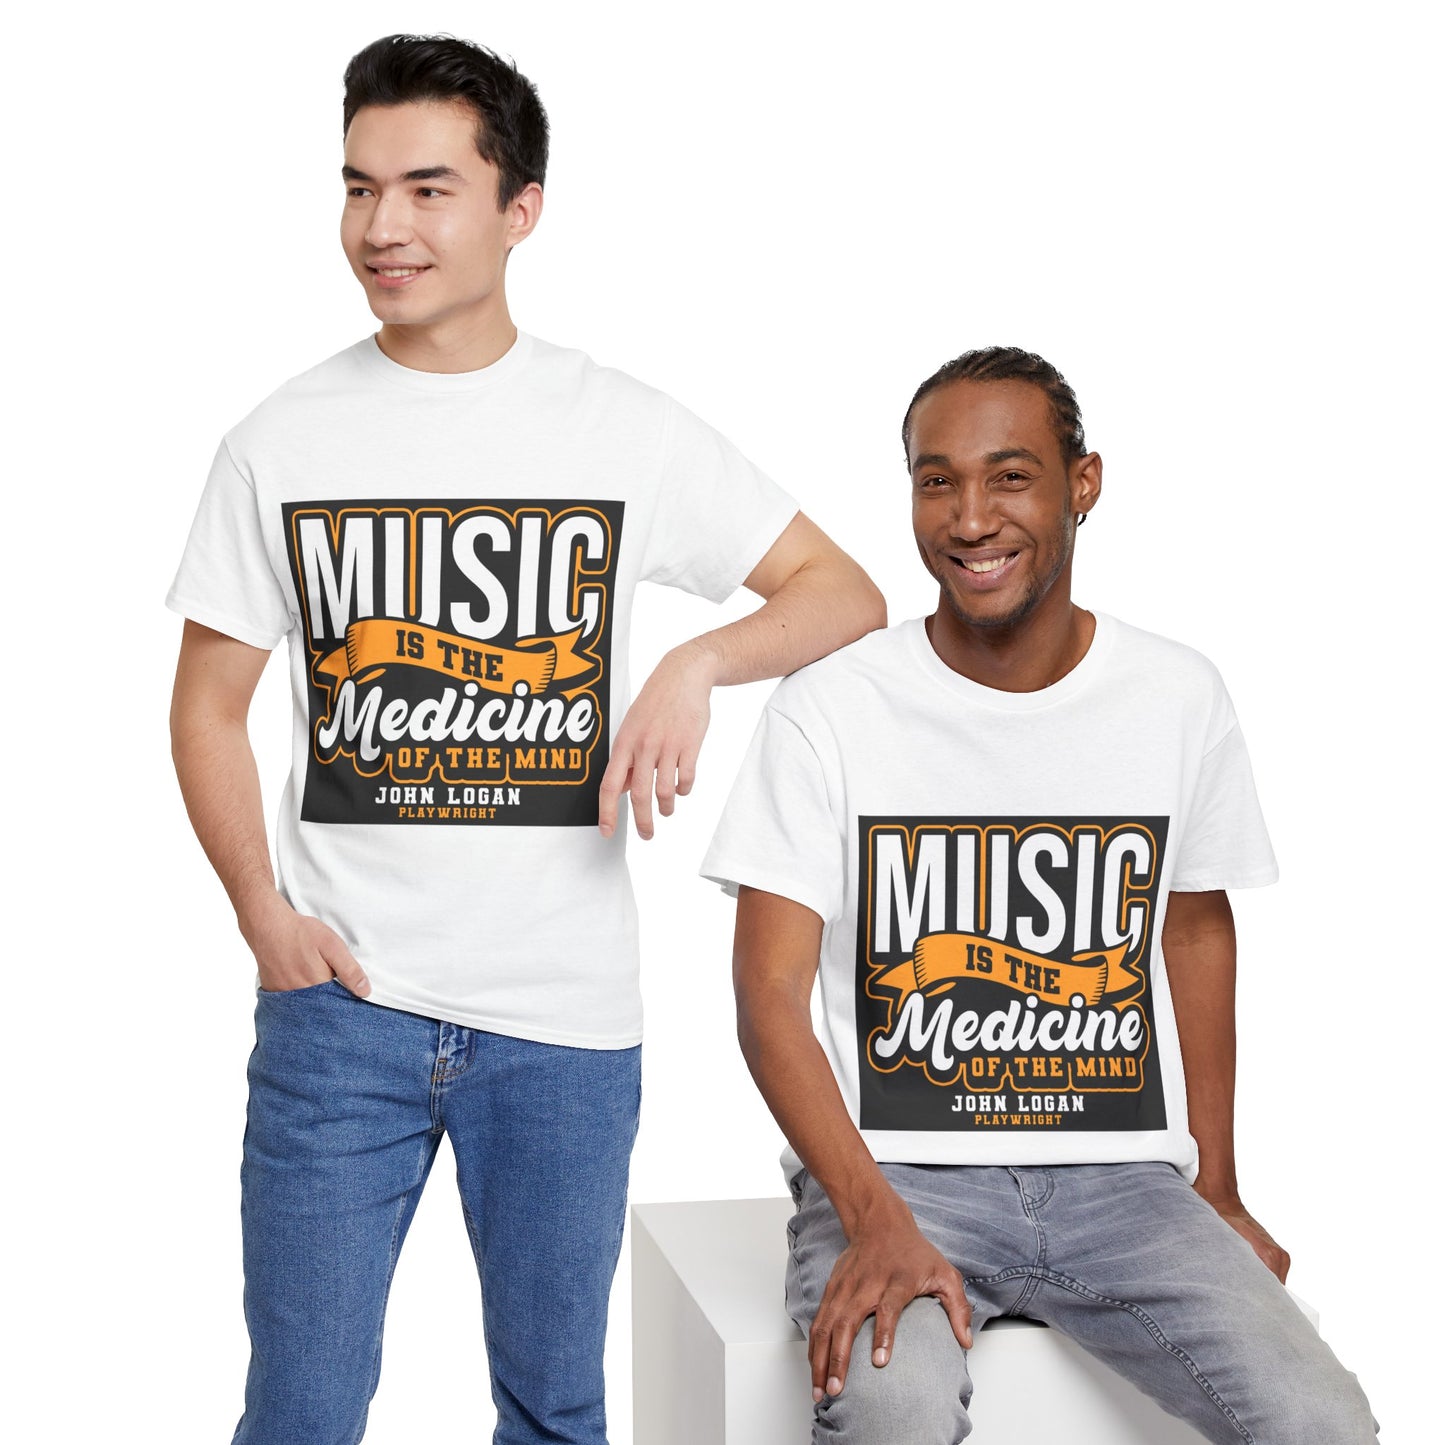 Human Voice: Music is the medicine of the mind